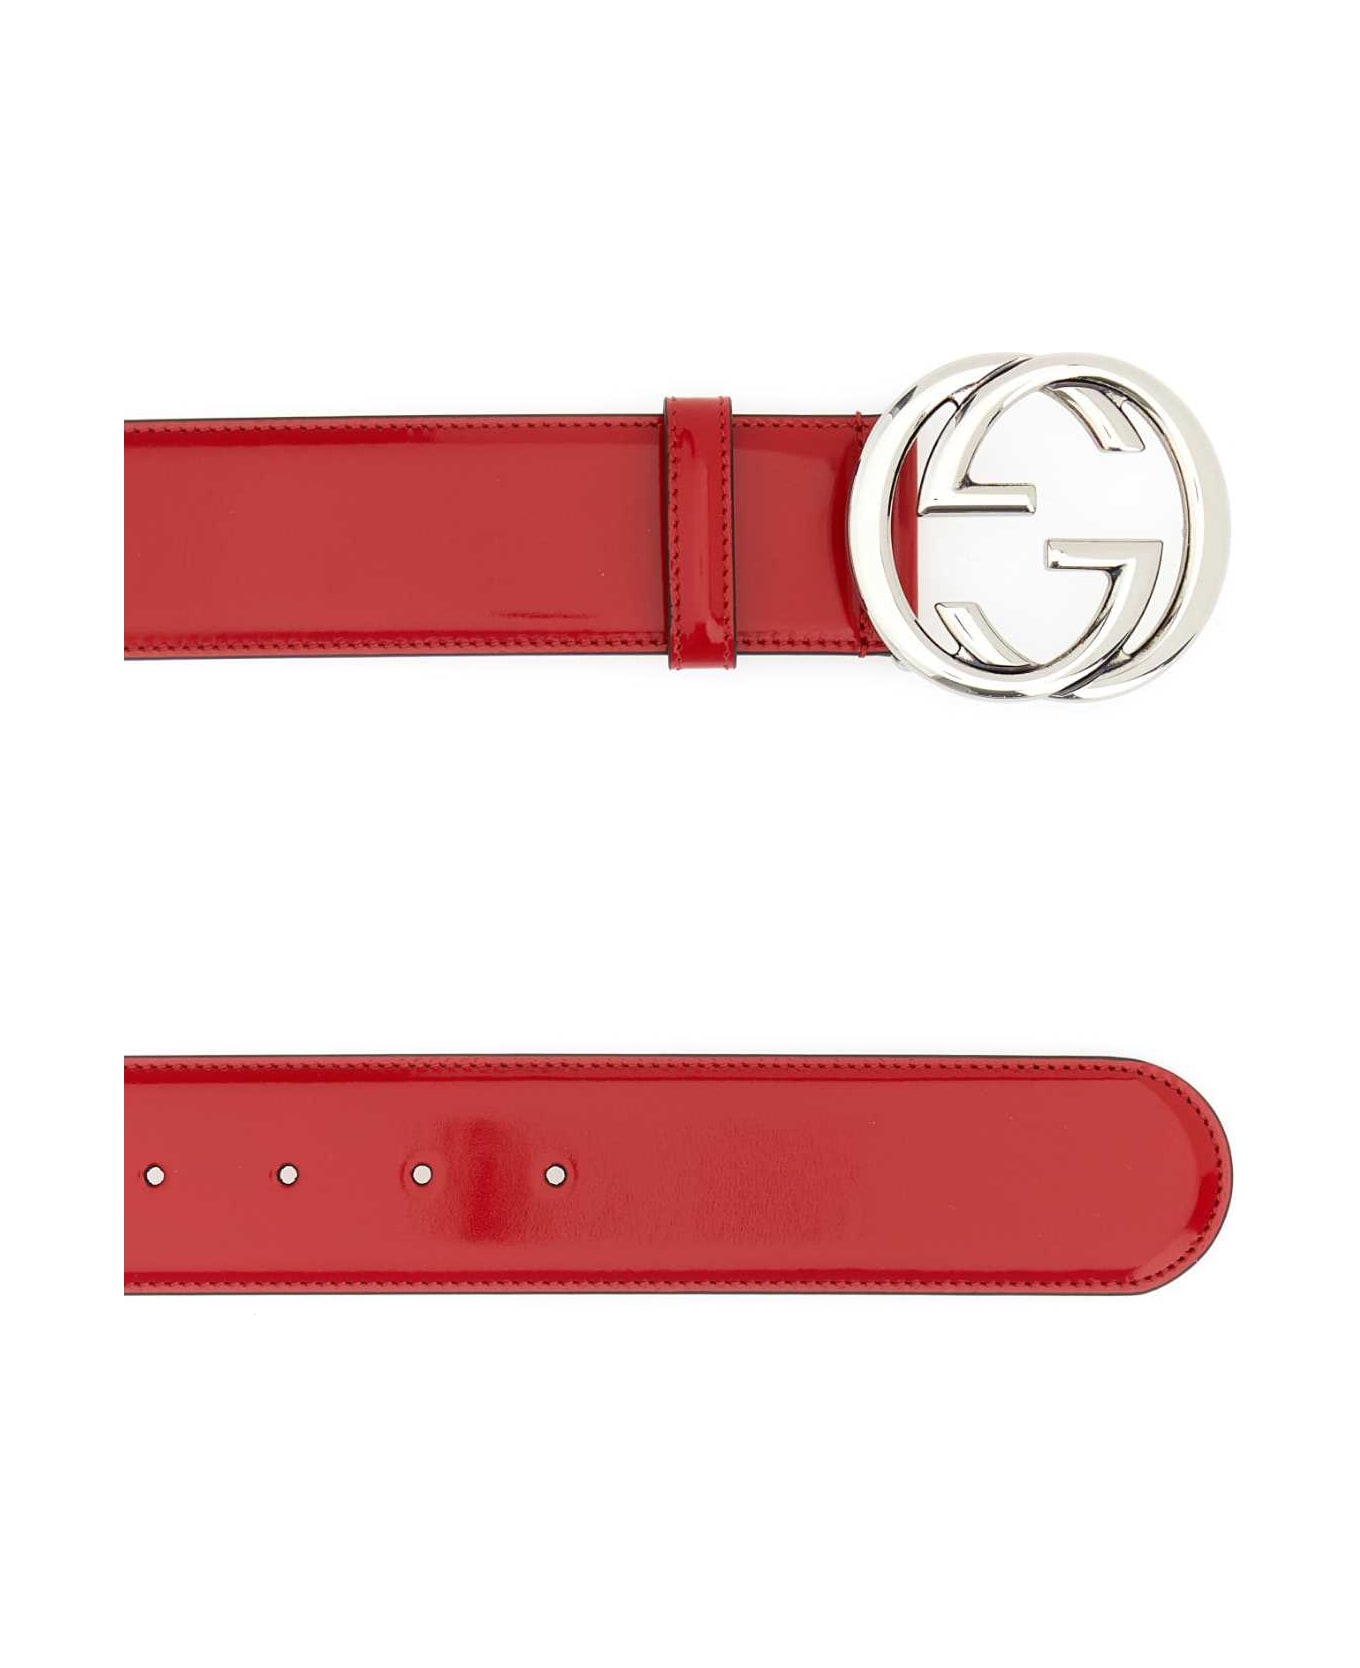 Gucci Red Leather Gucci Blondie Belt - 6404 ベルト